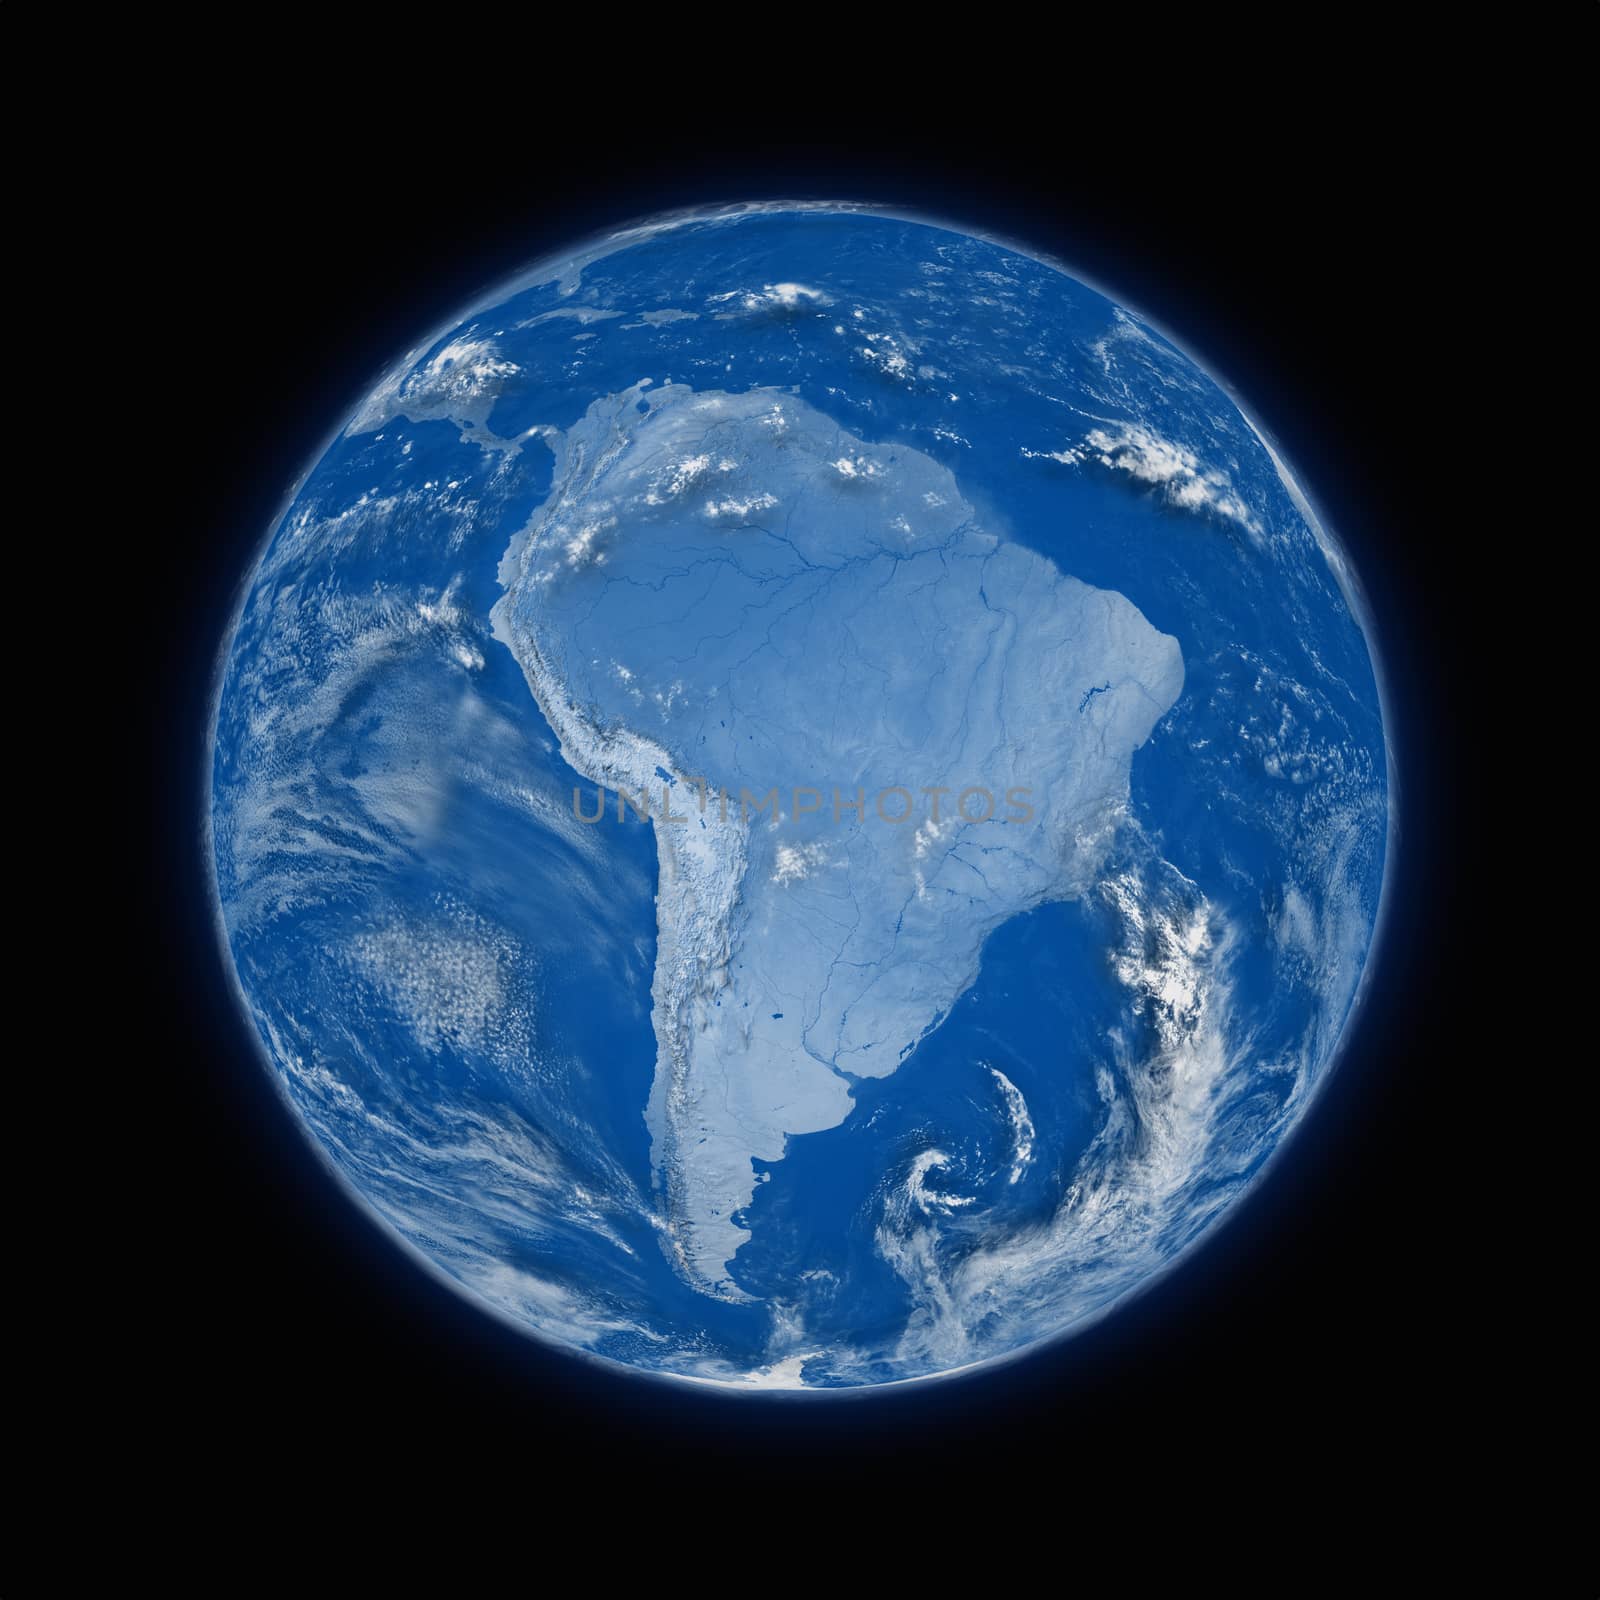 South America on blue planet Earth isolated on black background. Highly detailed planet surface. Elements of this image furnished by NASA.